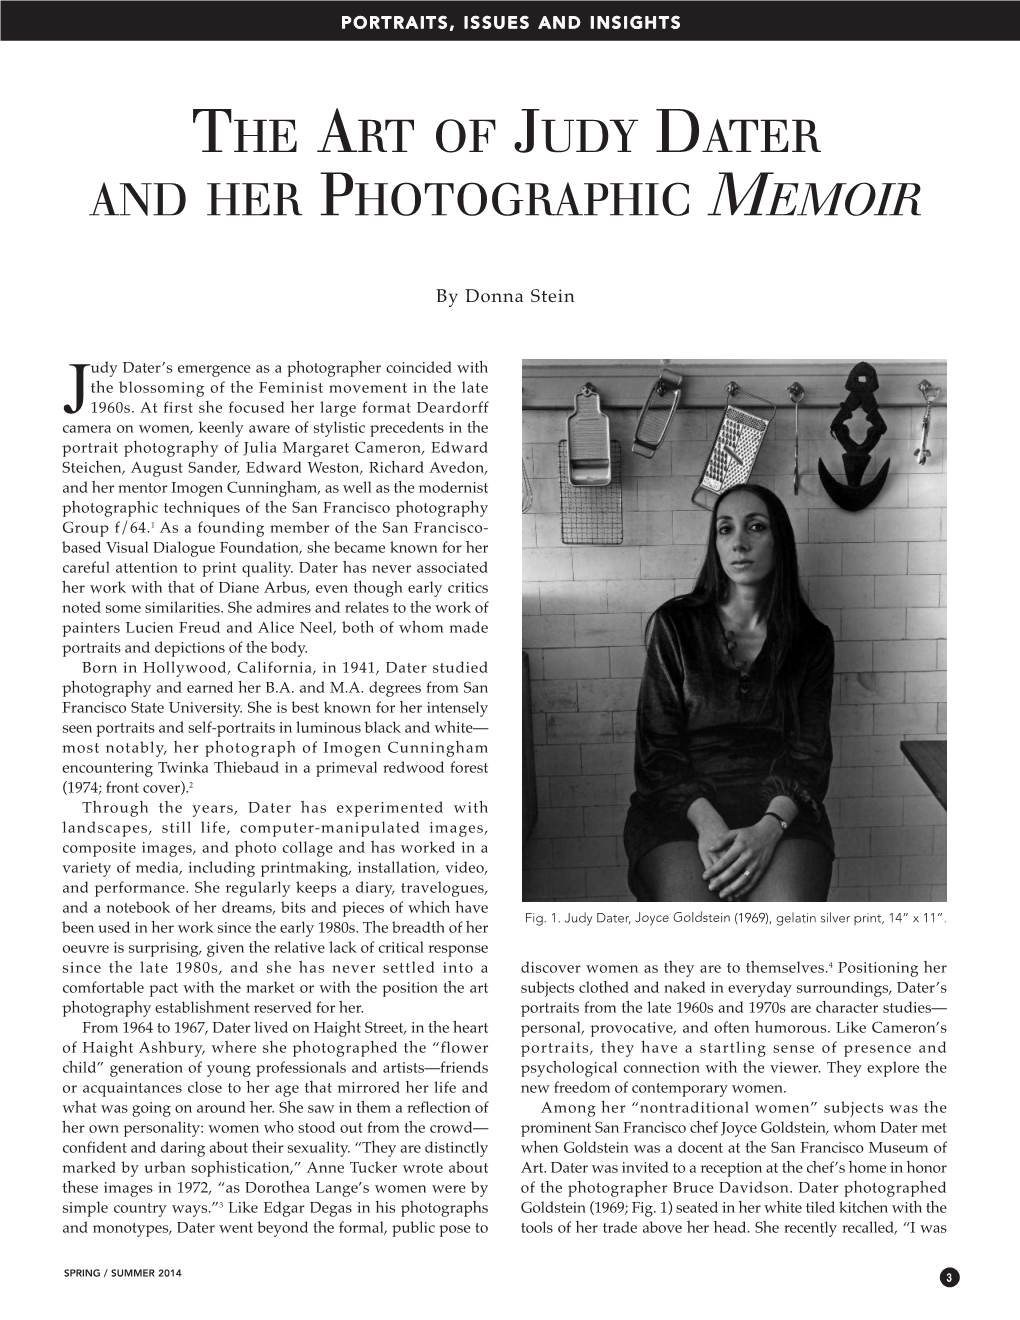 The Art of Judy Dater and Her Photographic Memoir